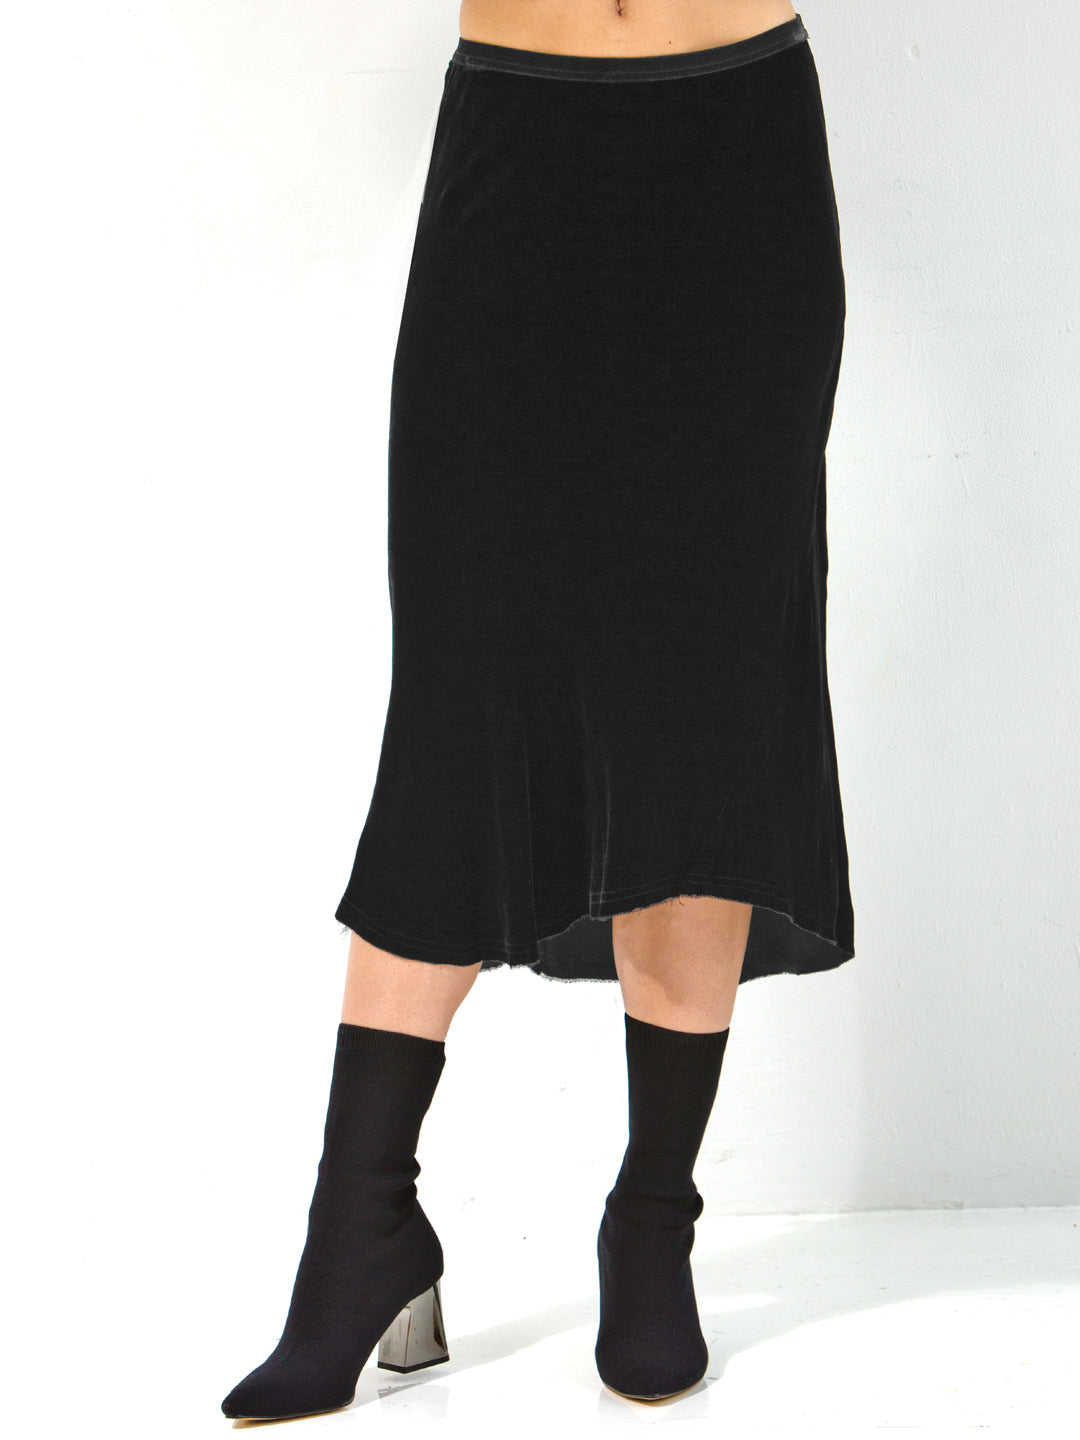 Go velvet underground skirt - Machine washable 82% rayon and 18% silk washed velvet blend skirt with bias cut and an asymmetrical seamed hem. This item also has a velvet elastic waistband at a midi length. 